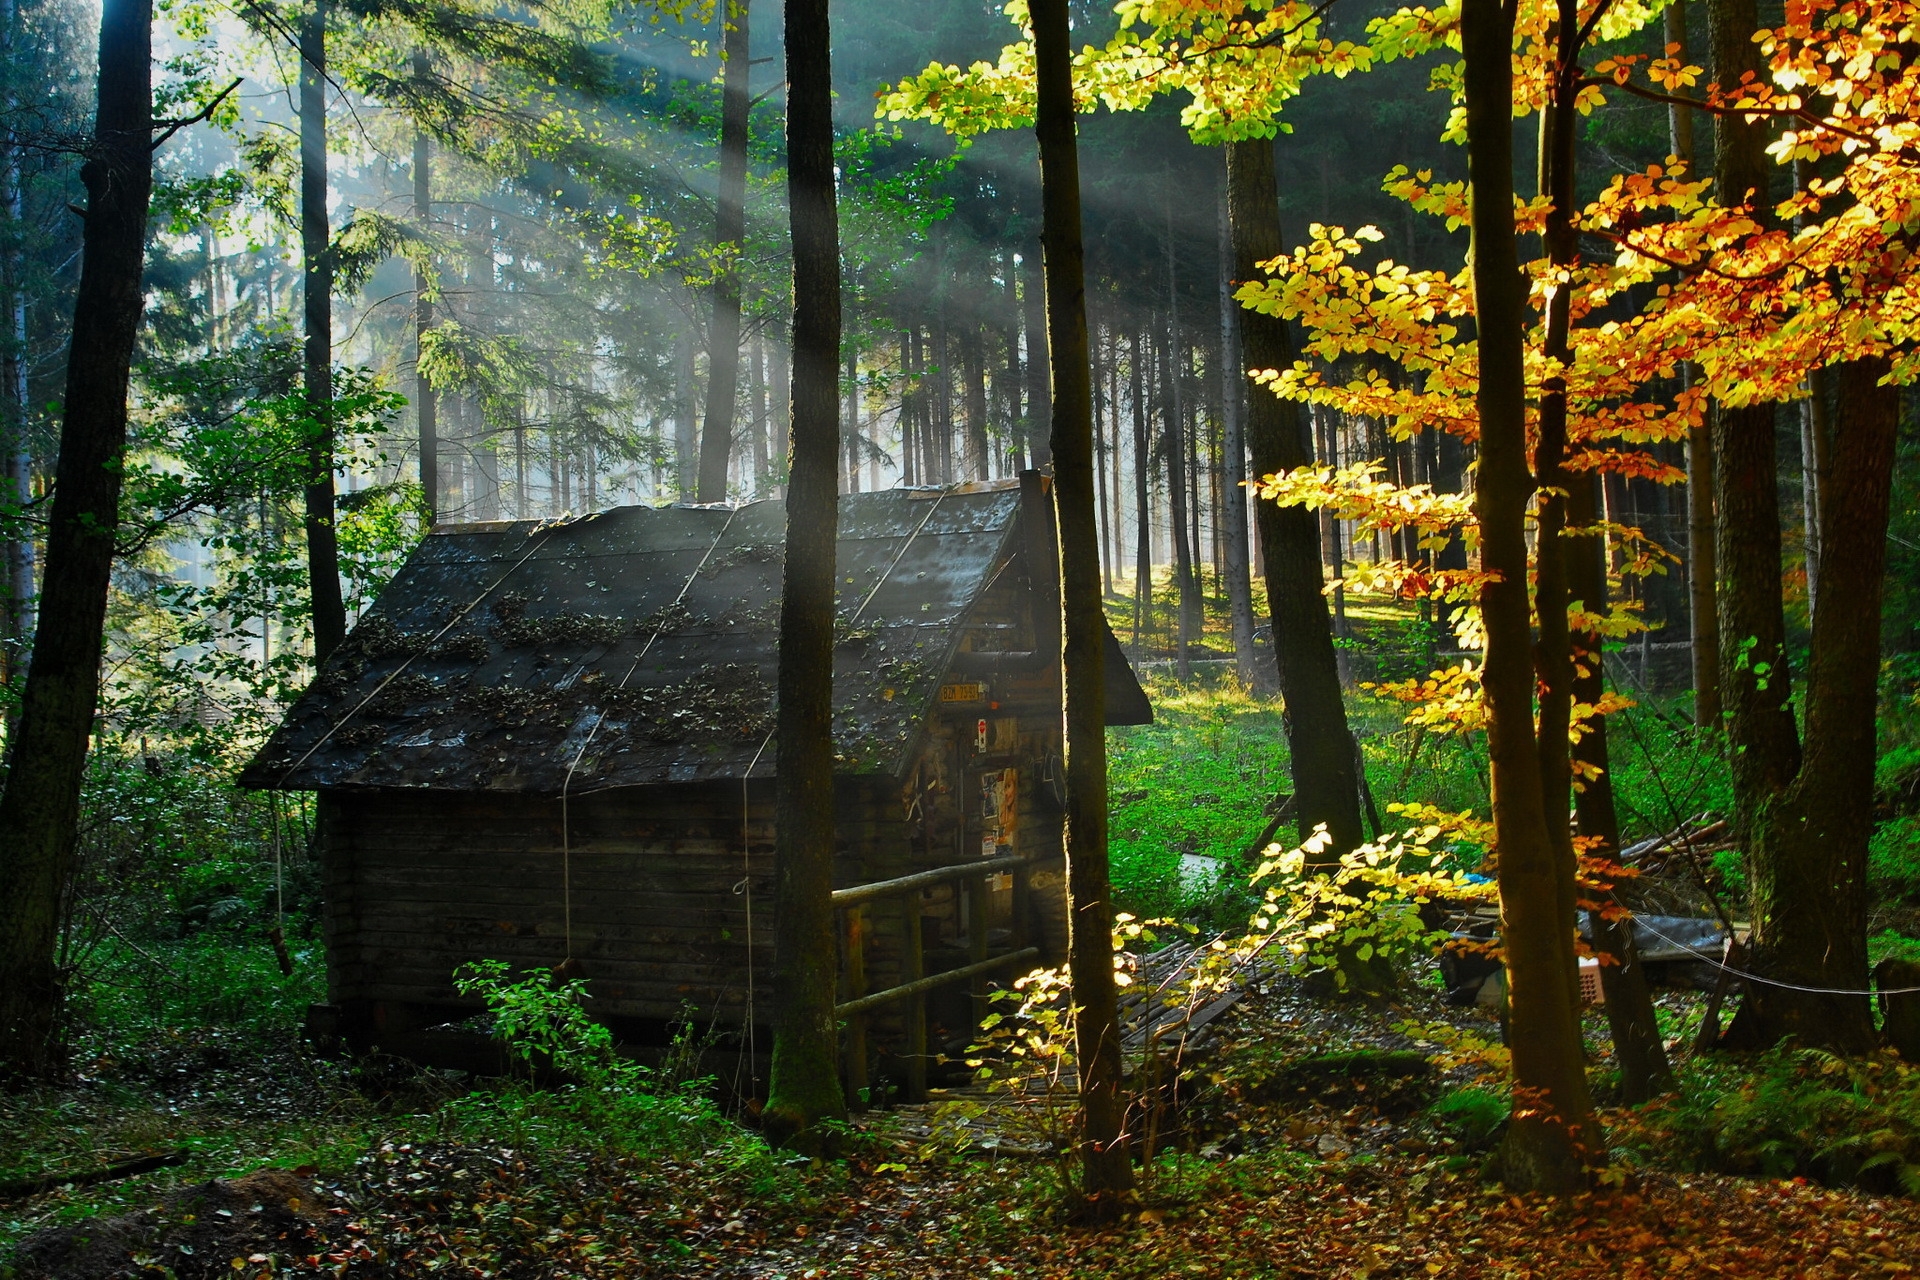 lodge, small house, nature, autumn, leaves, lumen, forest, morning, opening